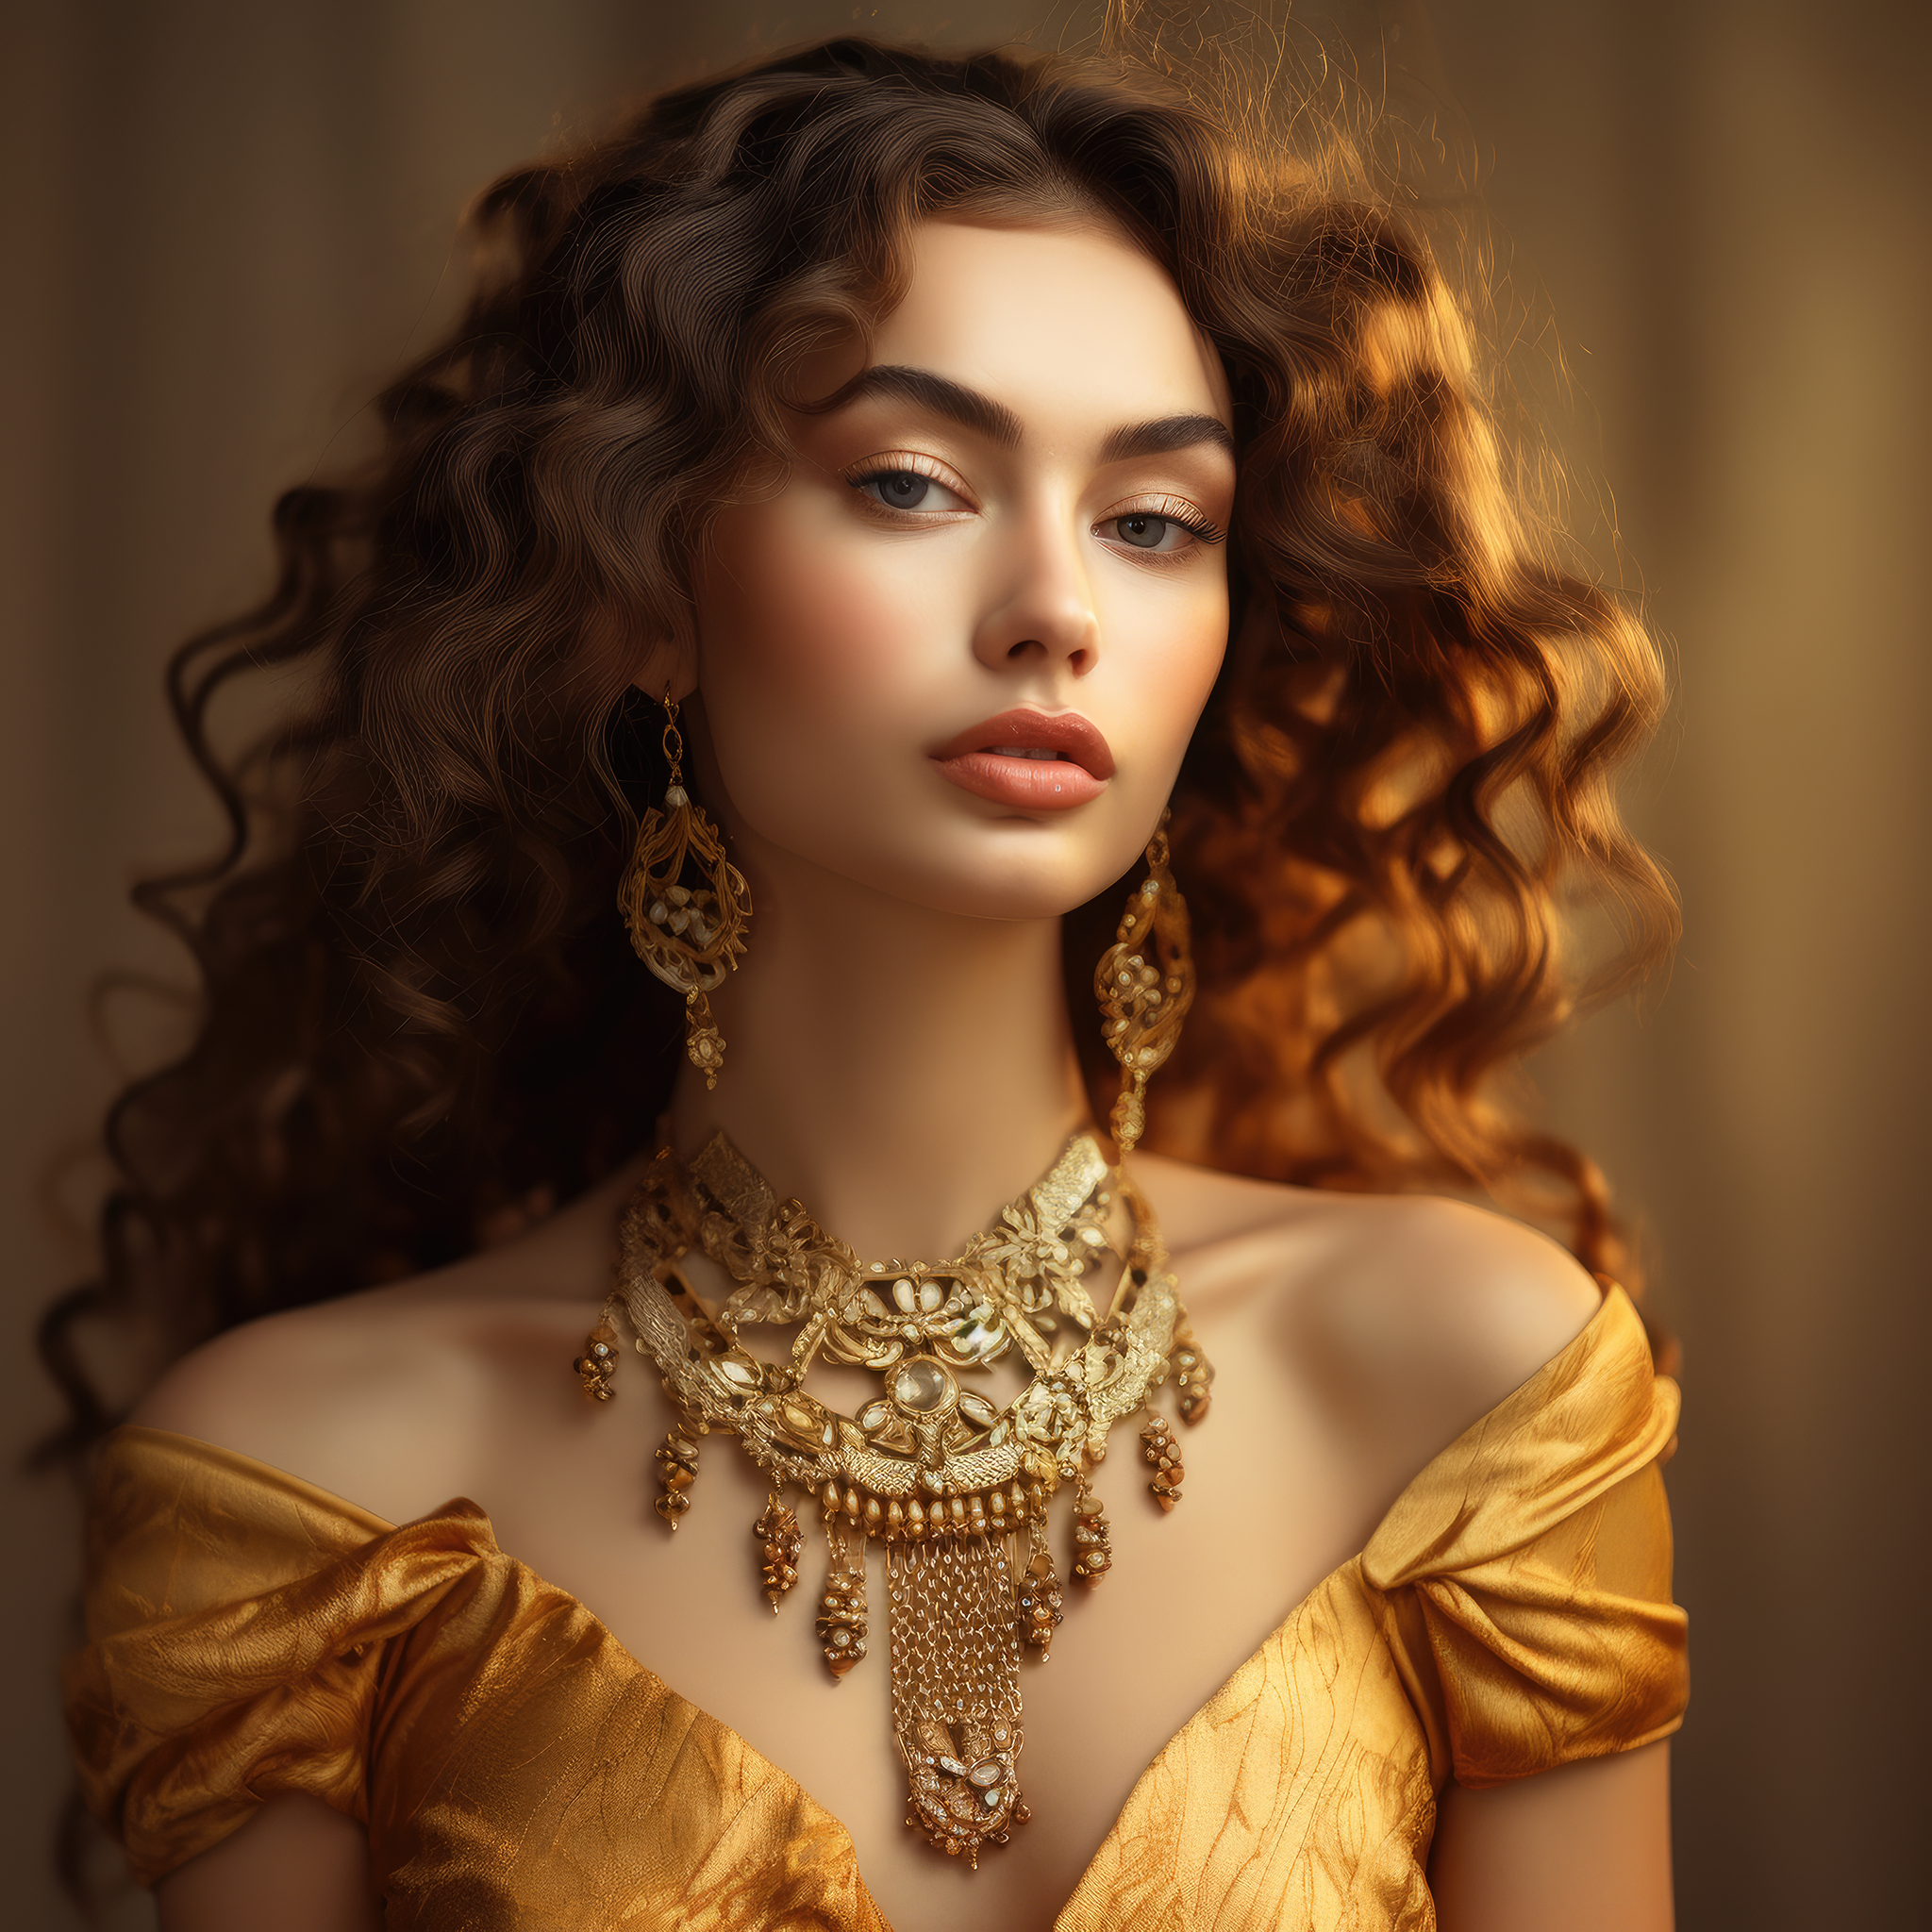 Portrait of a woman with wavy brown hair, wearing intricate gold jewelry including earrings and a statement necklace, set against a muted golden background.